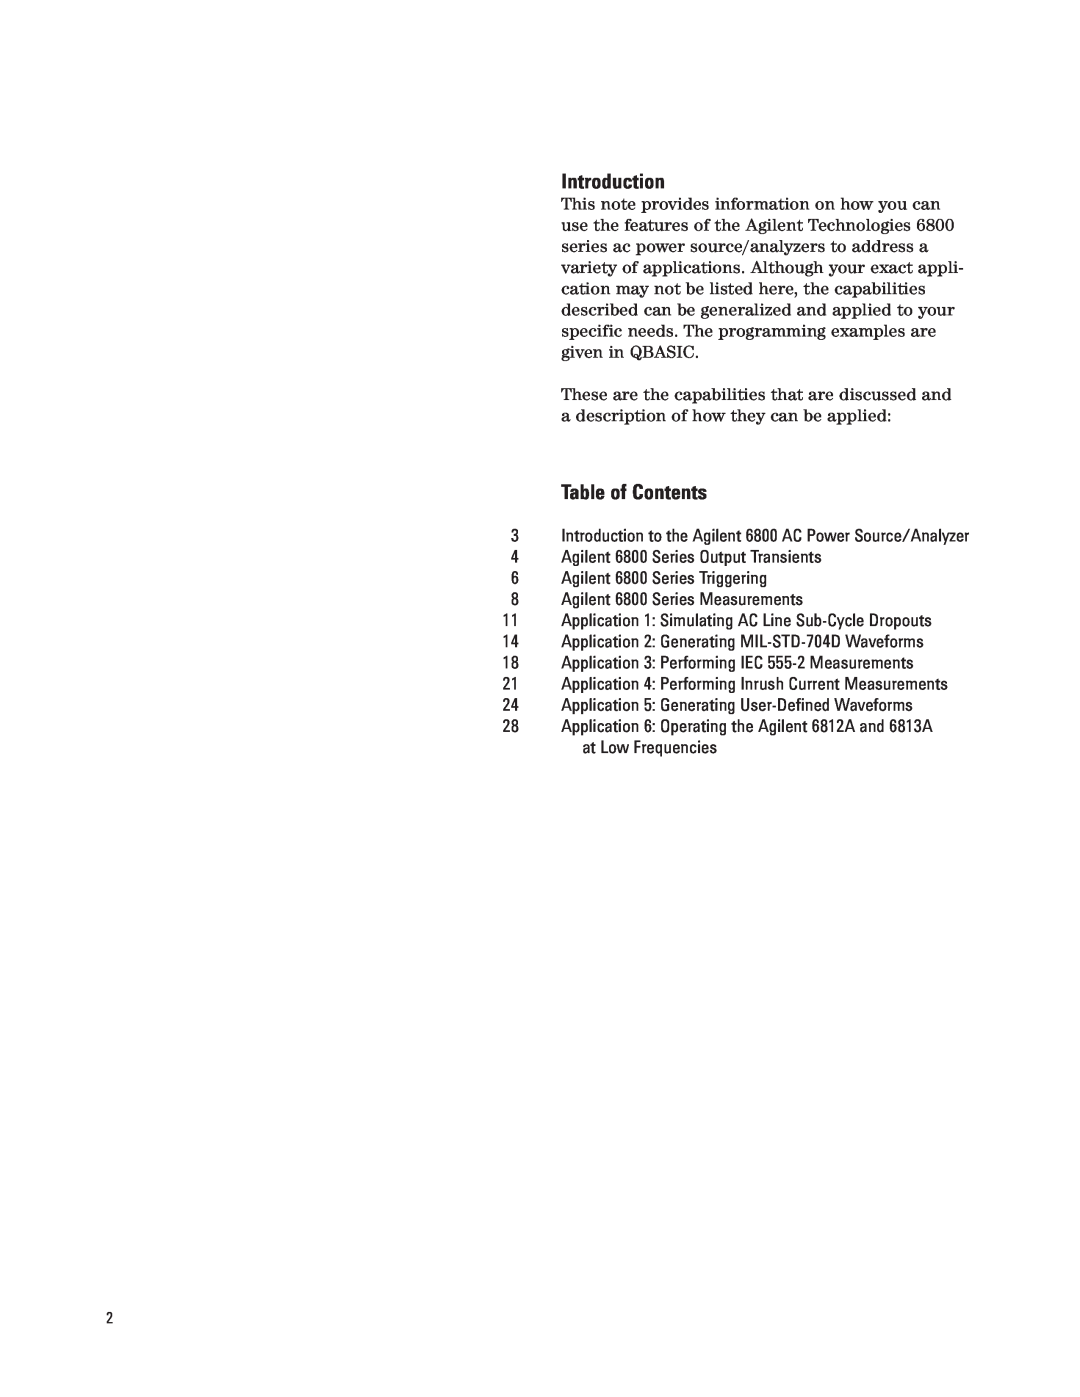 Agilent Technologies 6800 manual Introduction, Table of Contents 